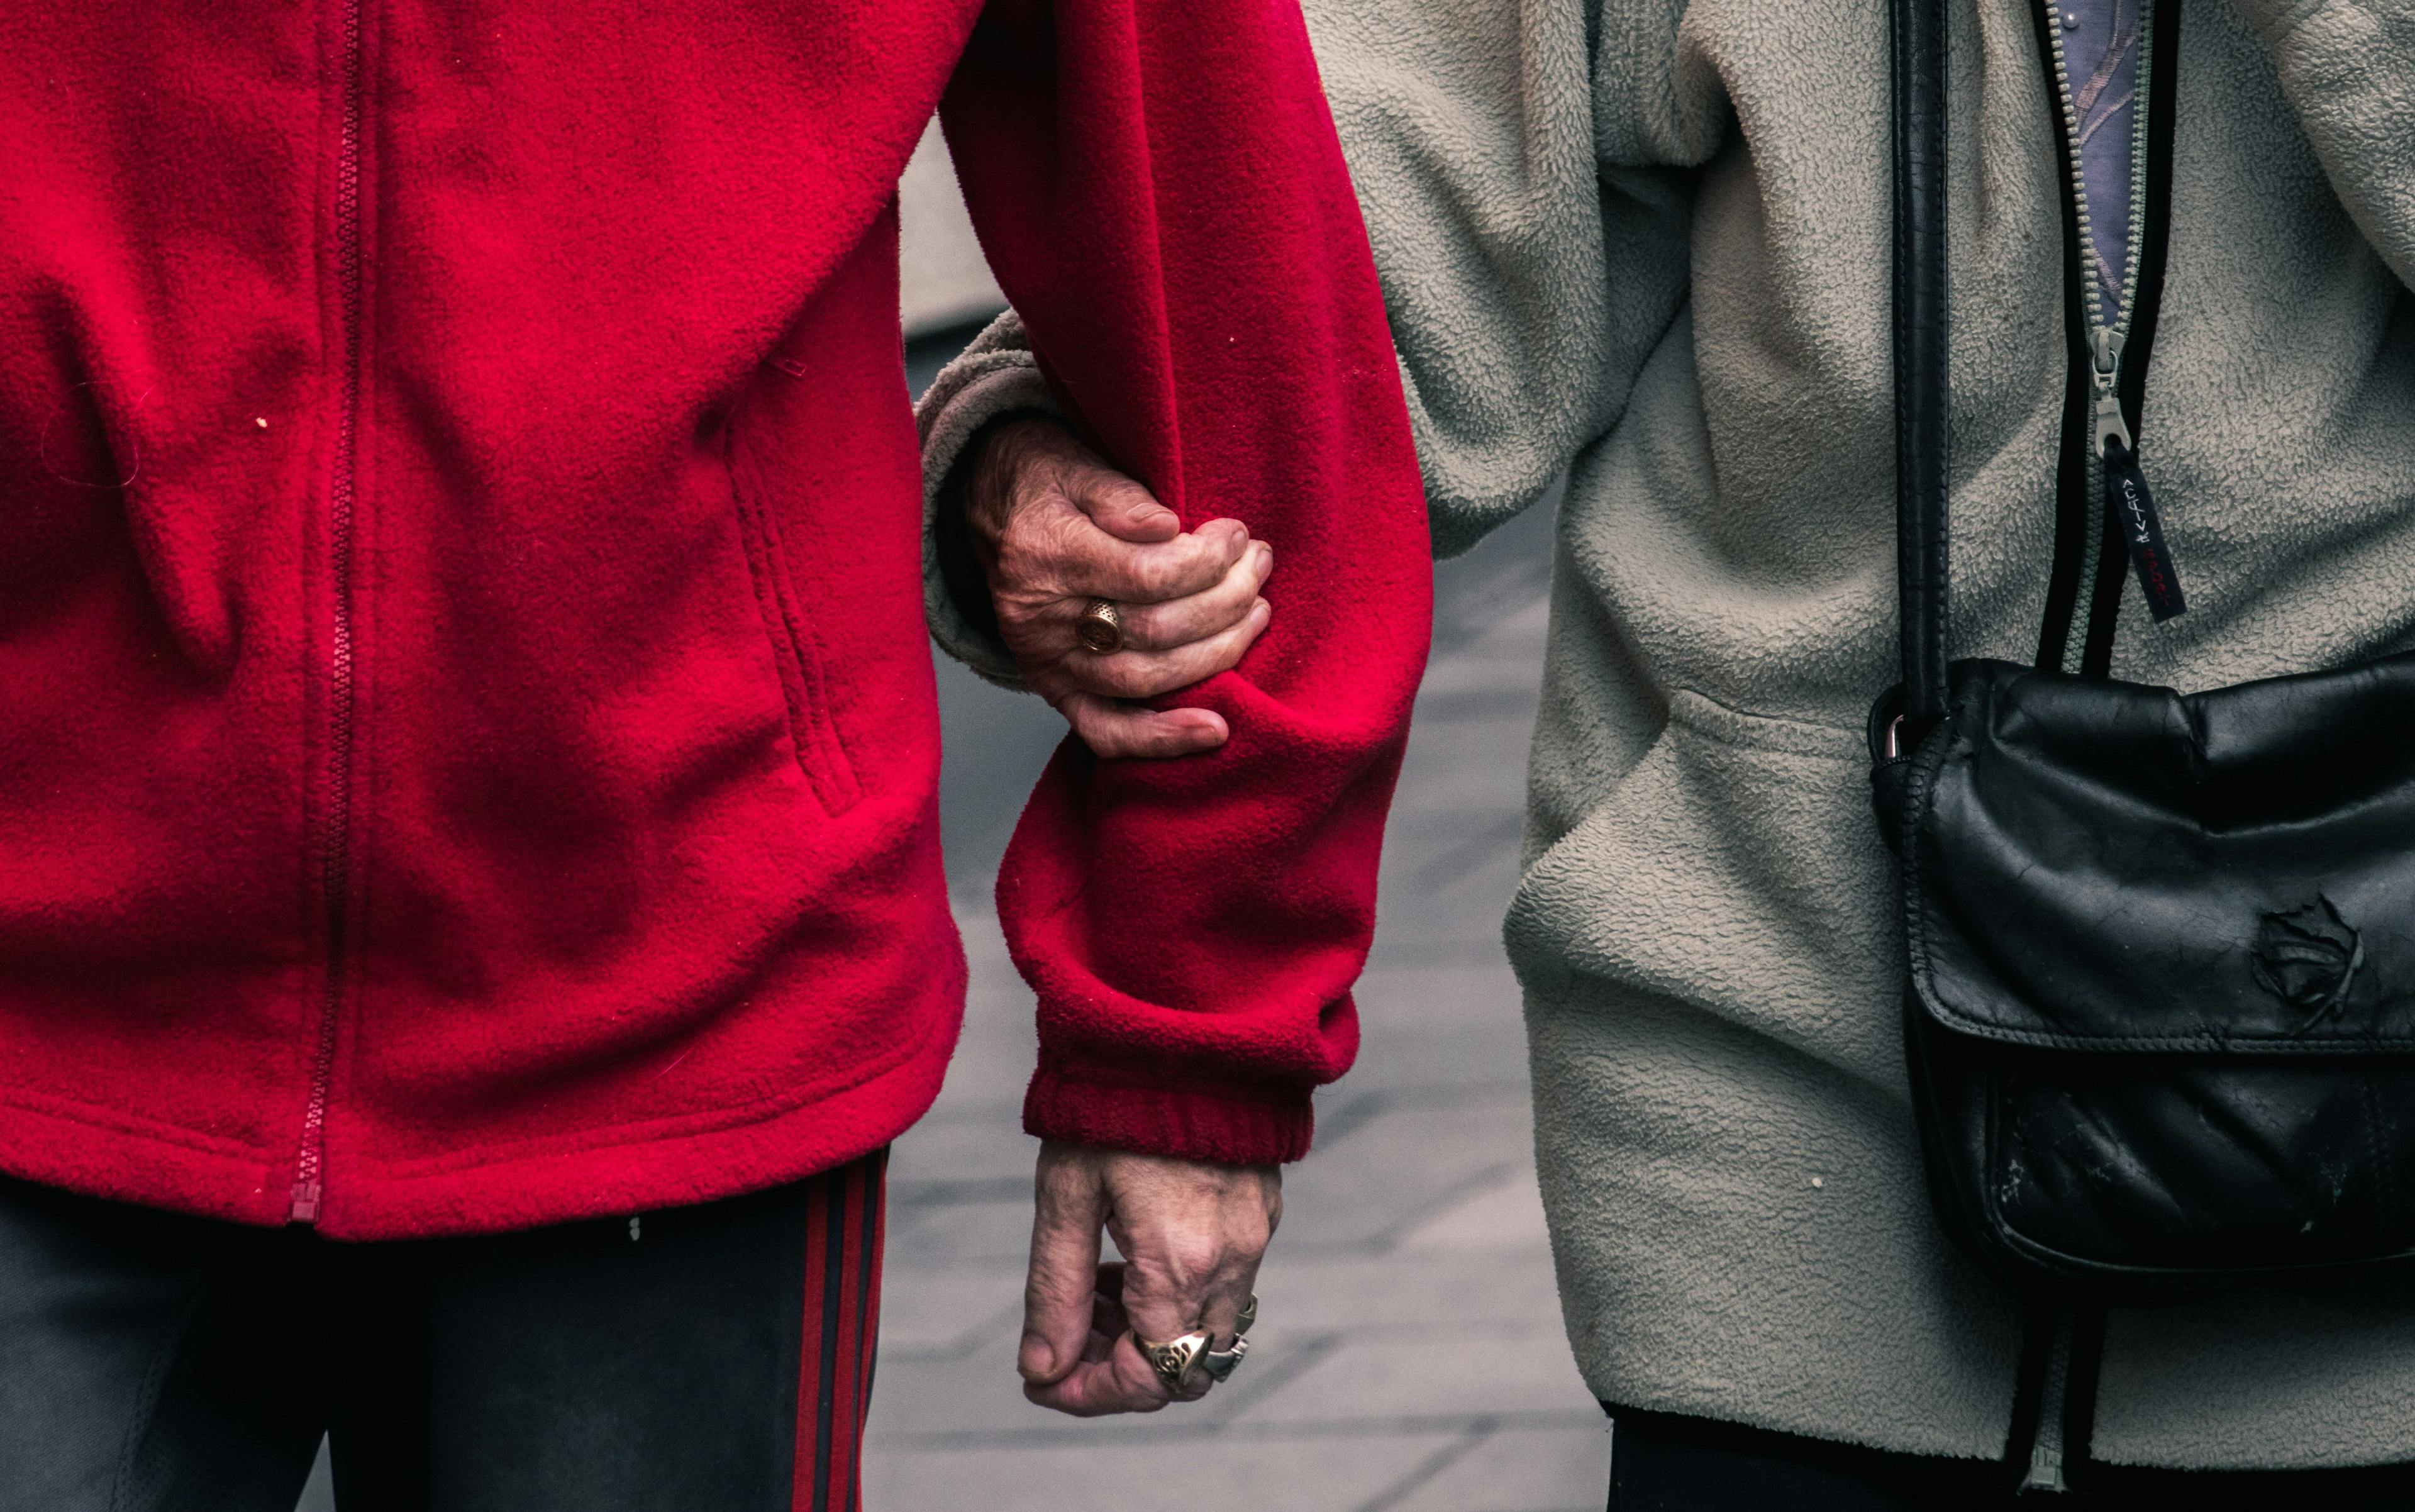 people holding hands